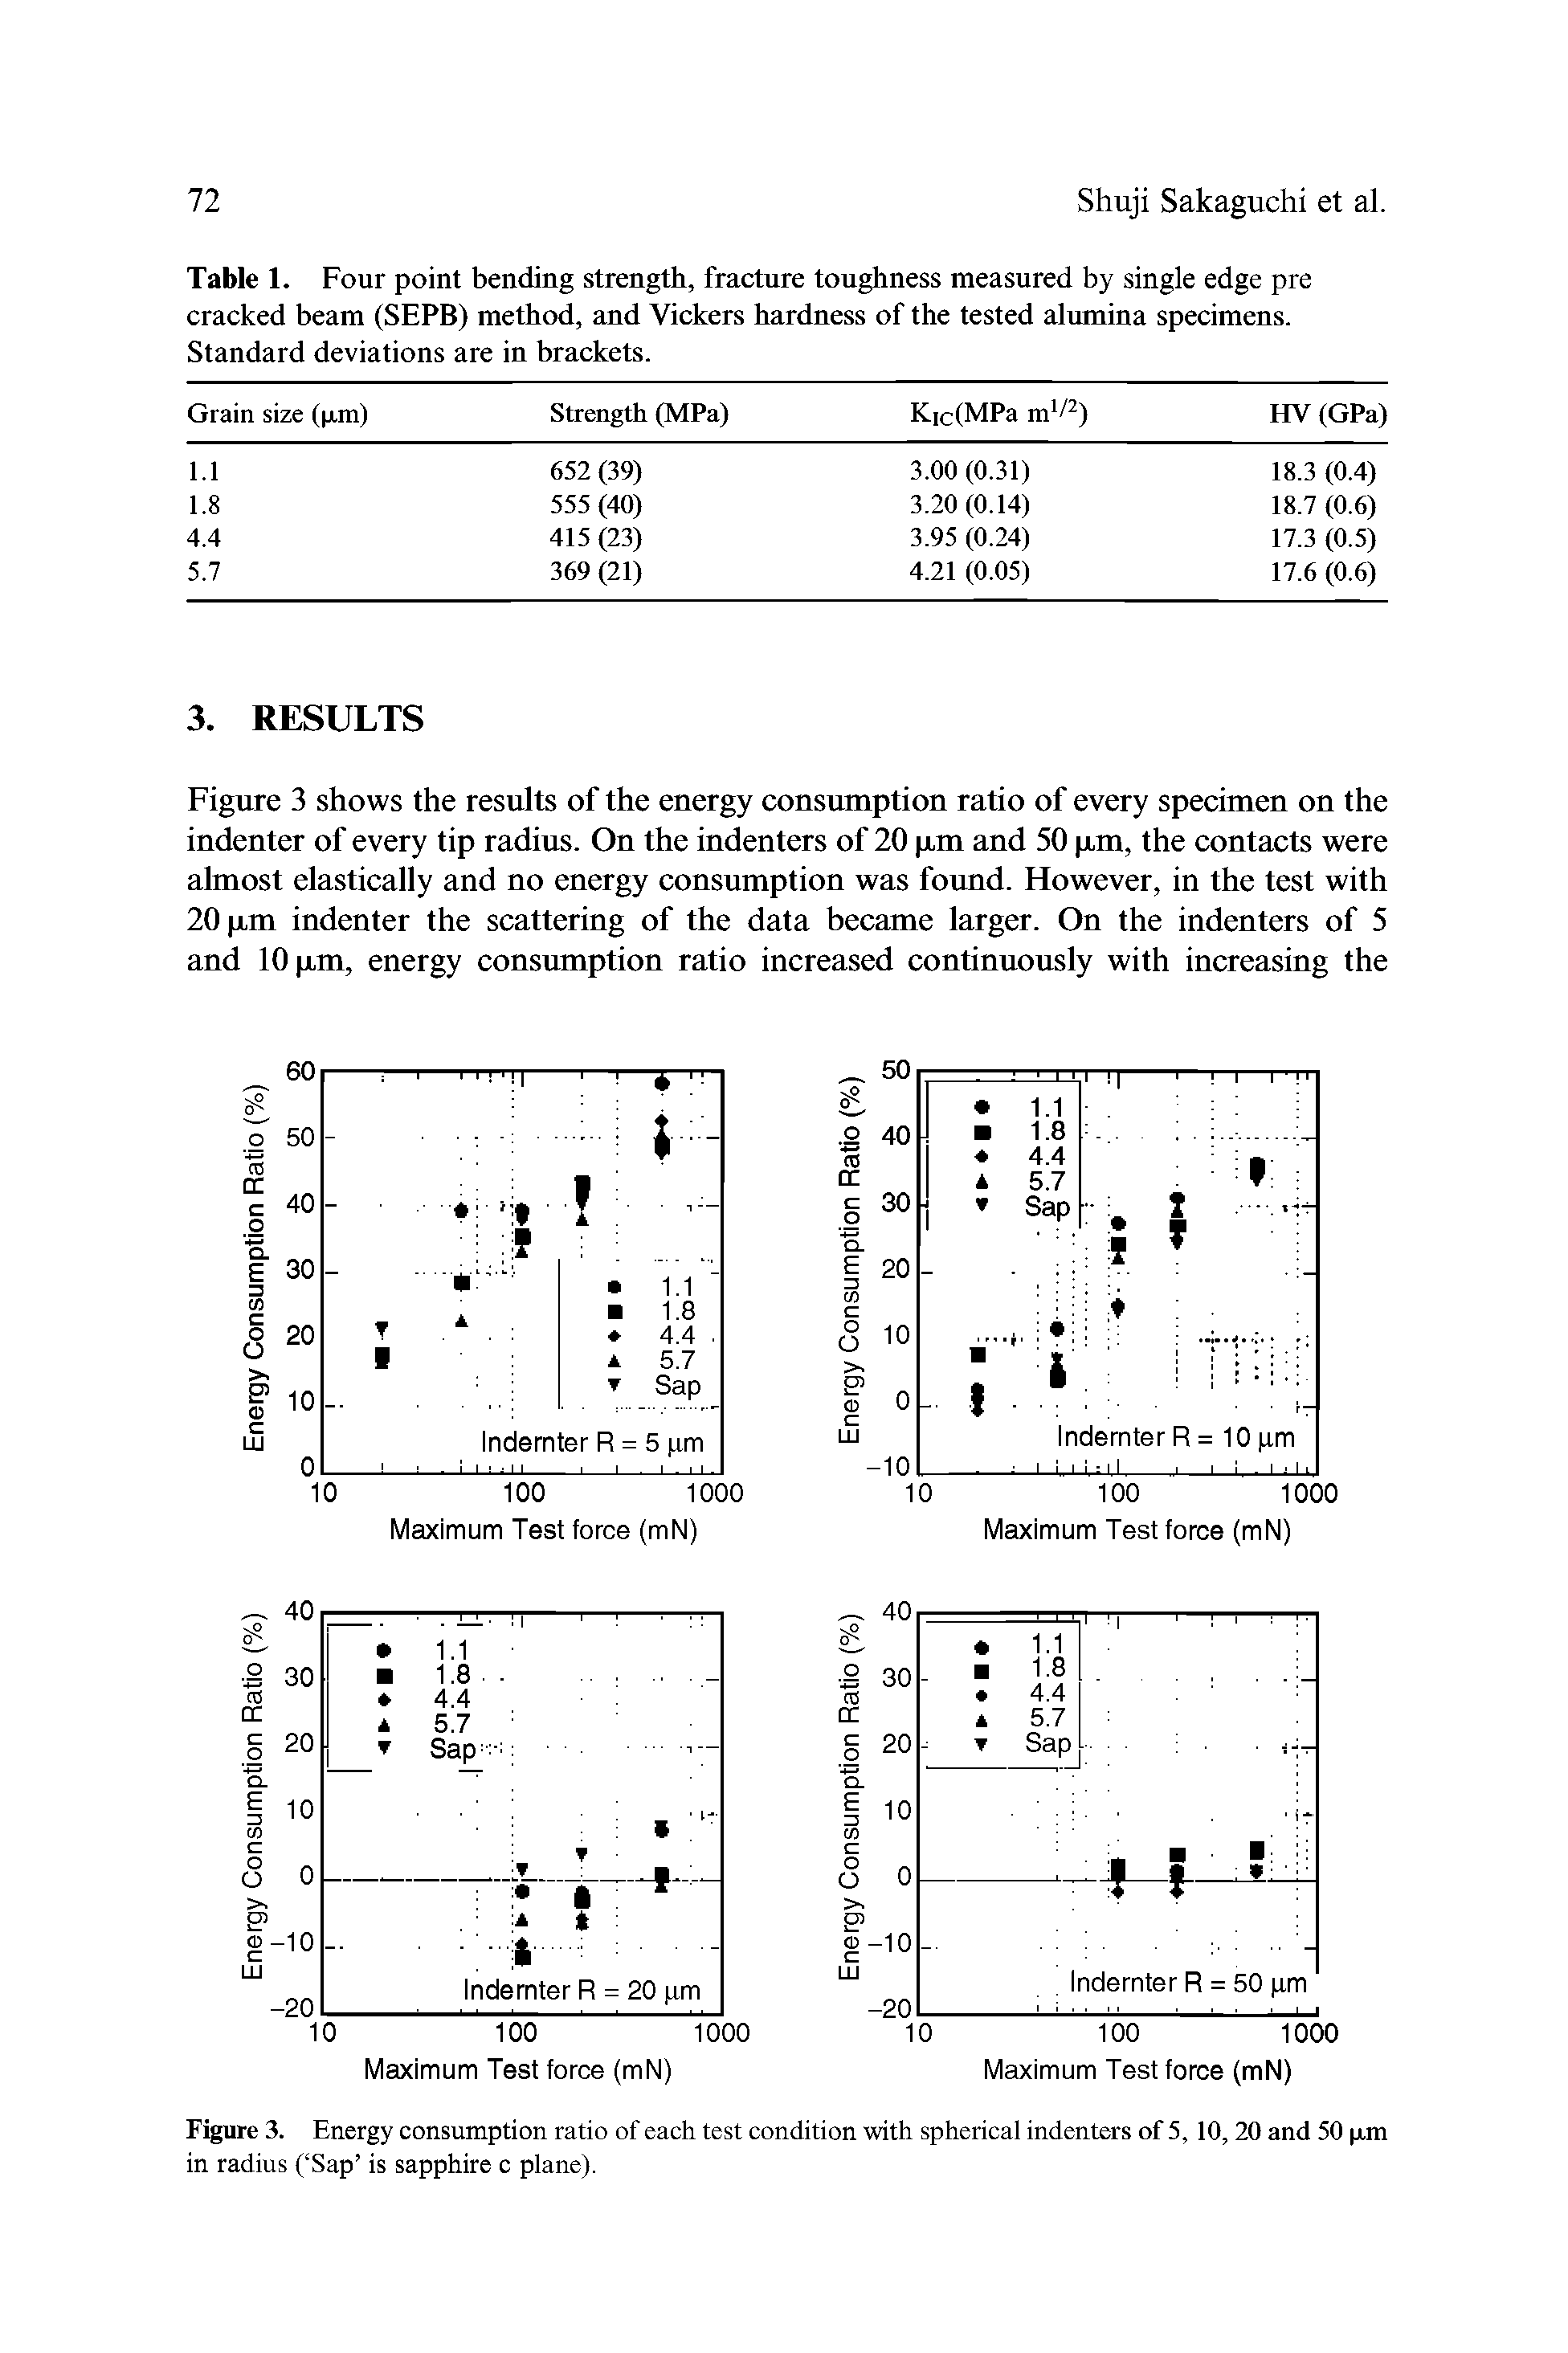 Table 1. Four point bending strength, fracture toughness measured by single edge pre cracked beam (SEPB) method, and Vickers hardness of the tested alumina specimens. Standard deviations are in brackets.